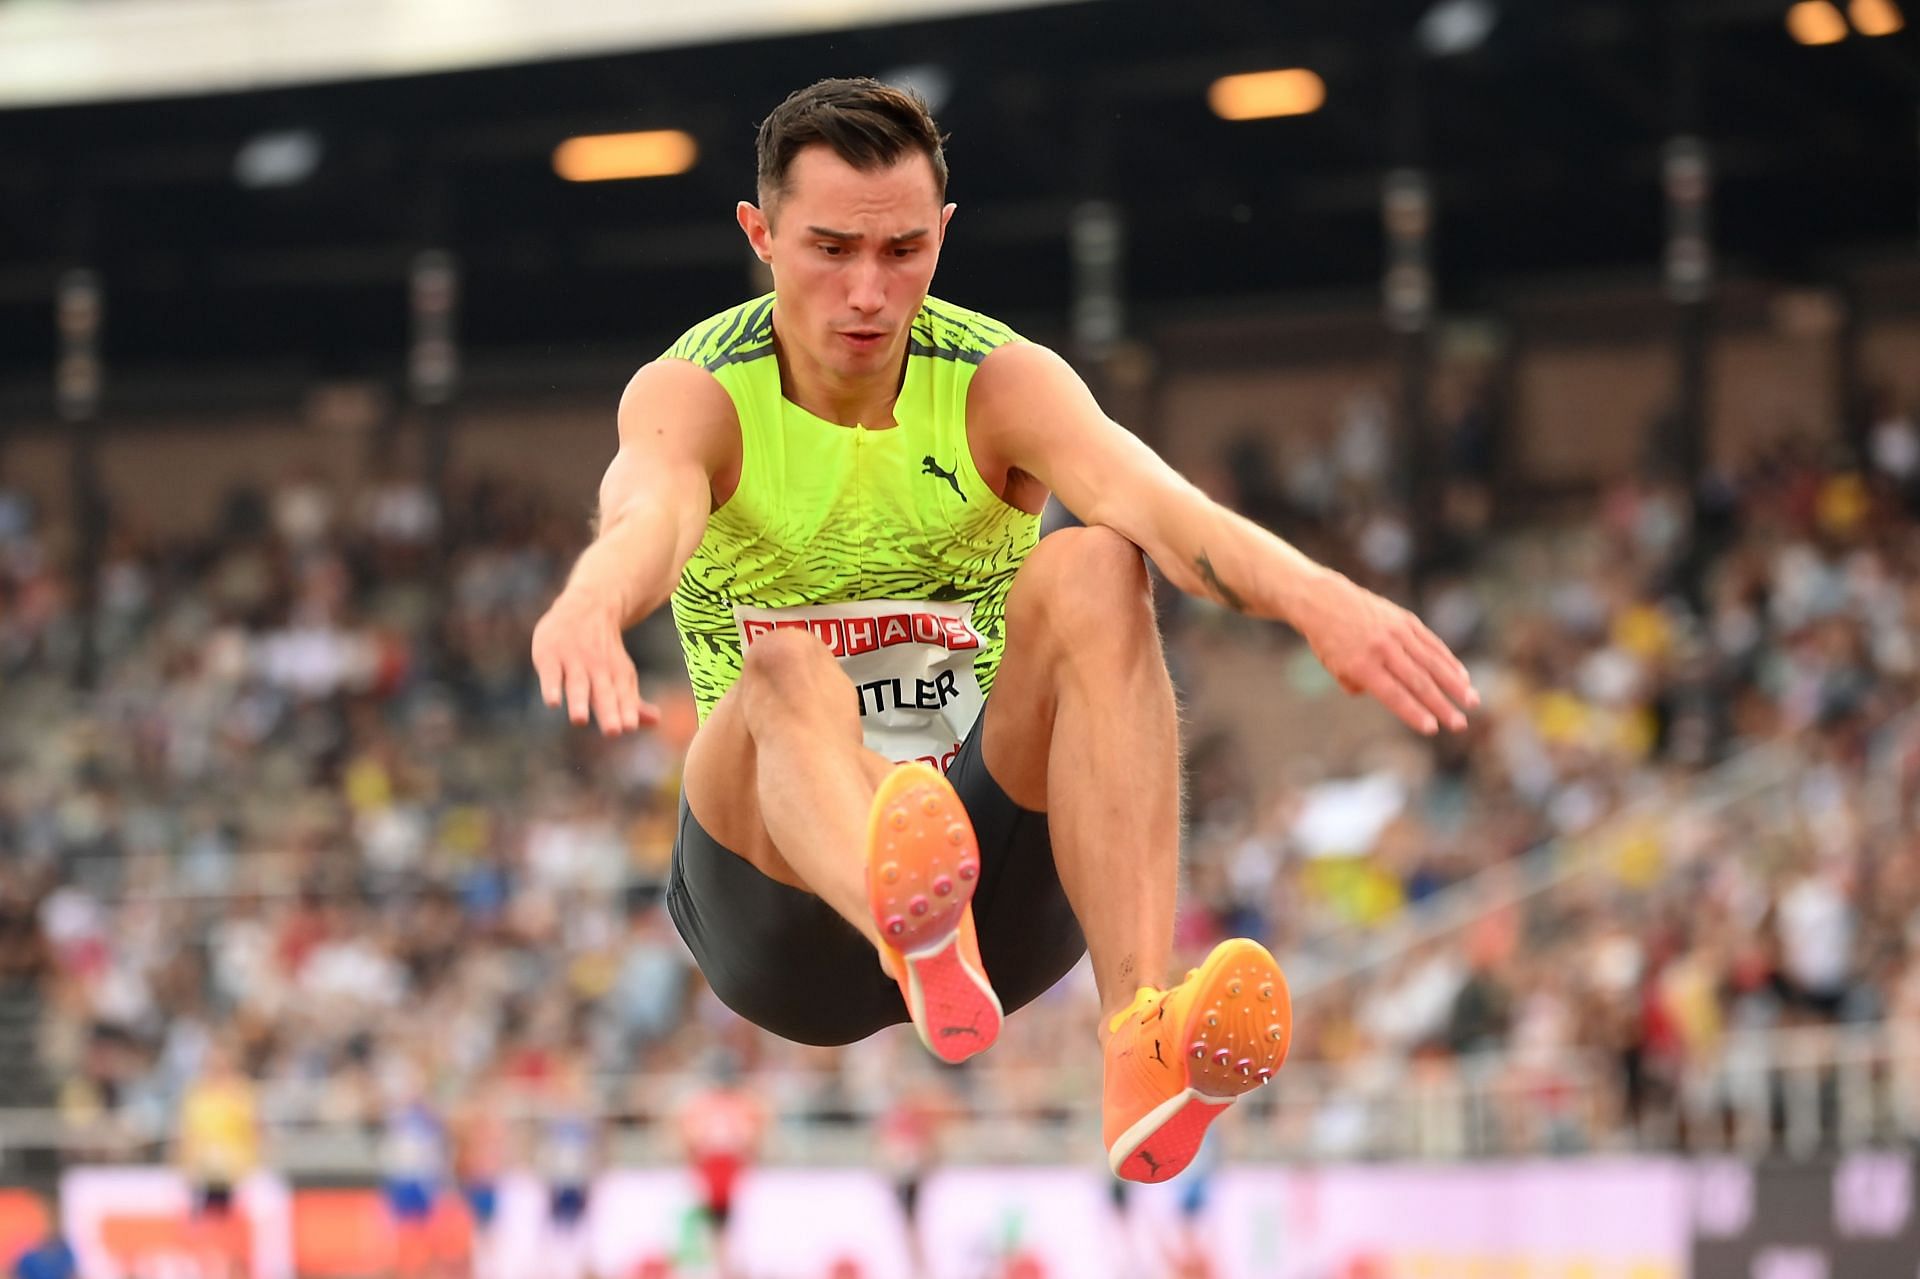 How to watch Brussels Diamond League 2022 Livestream, broadcast